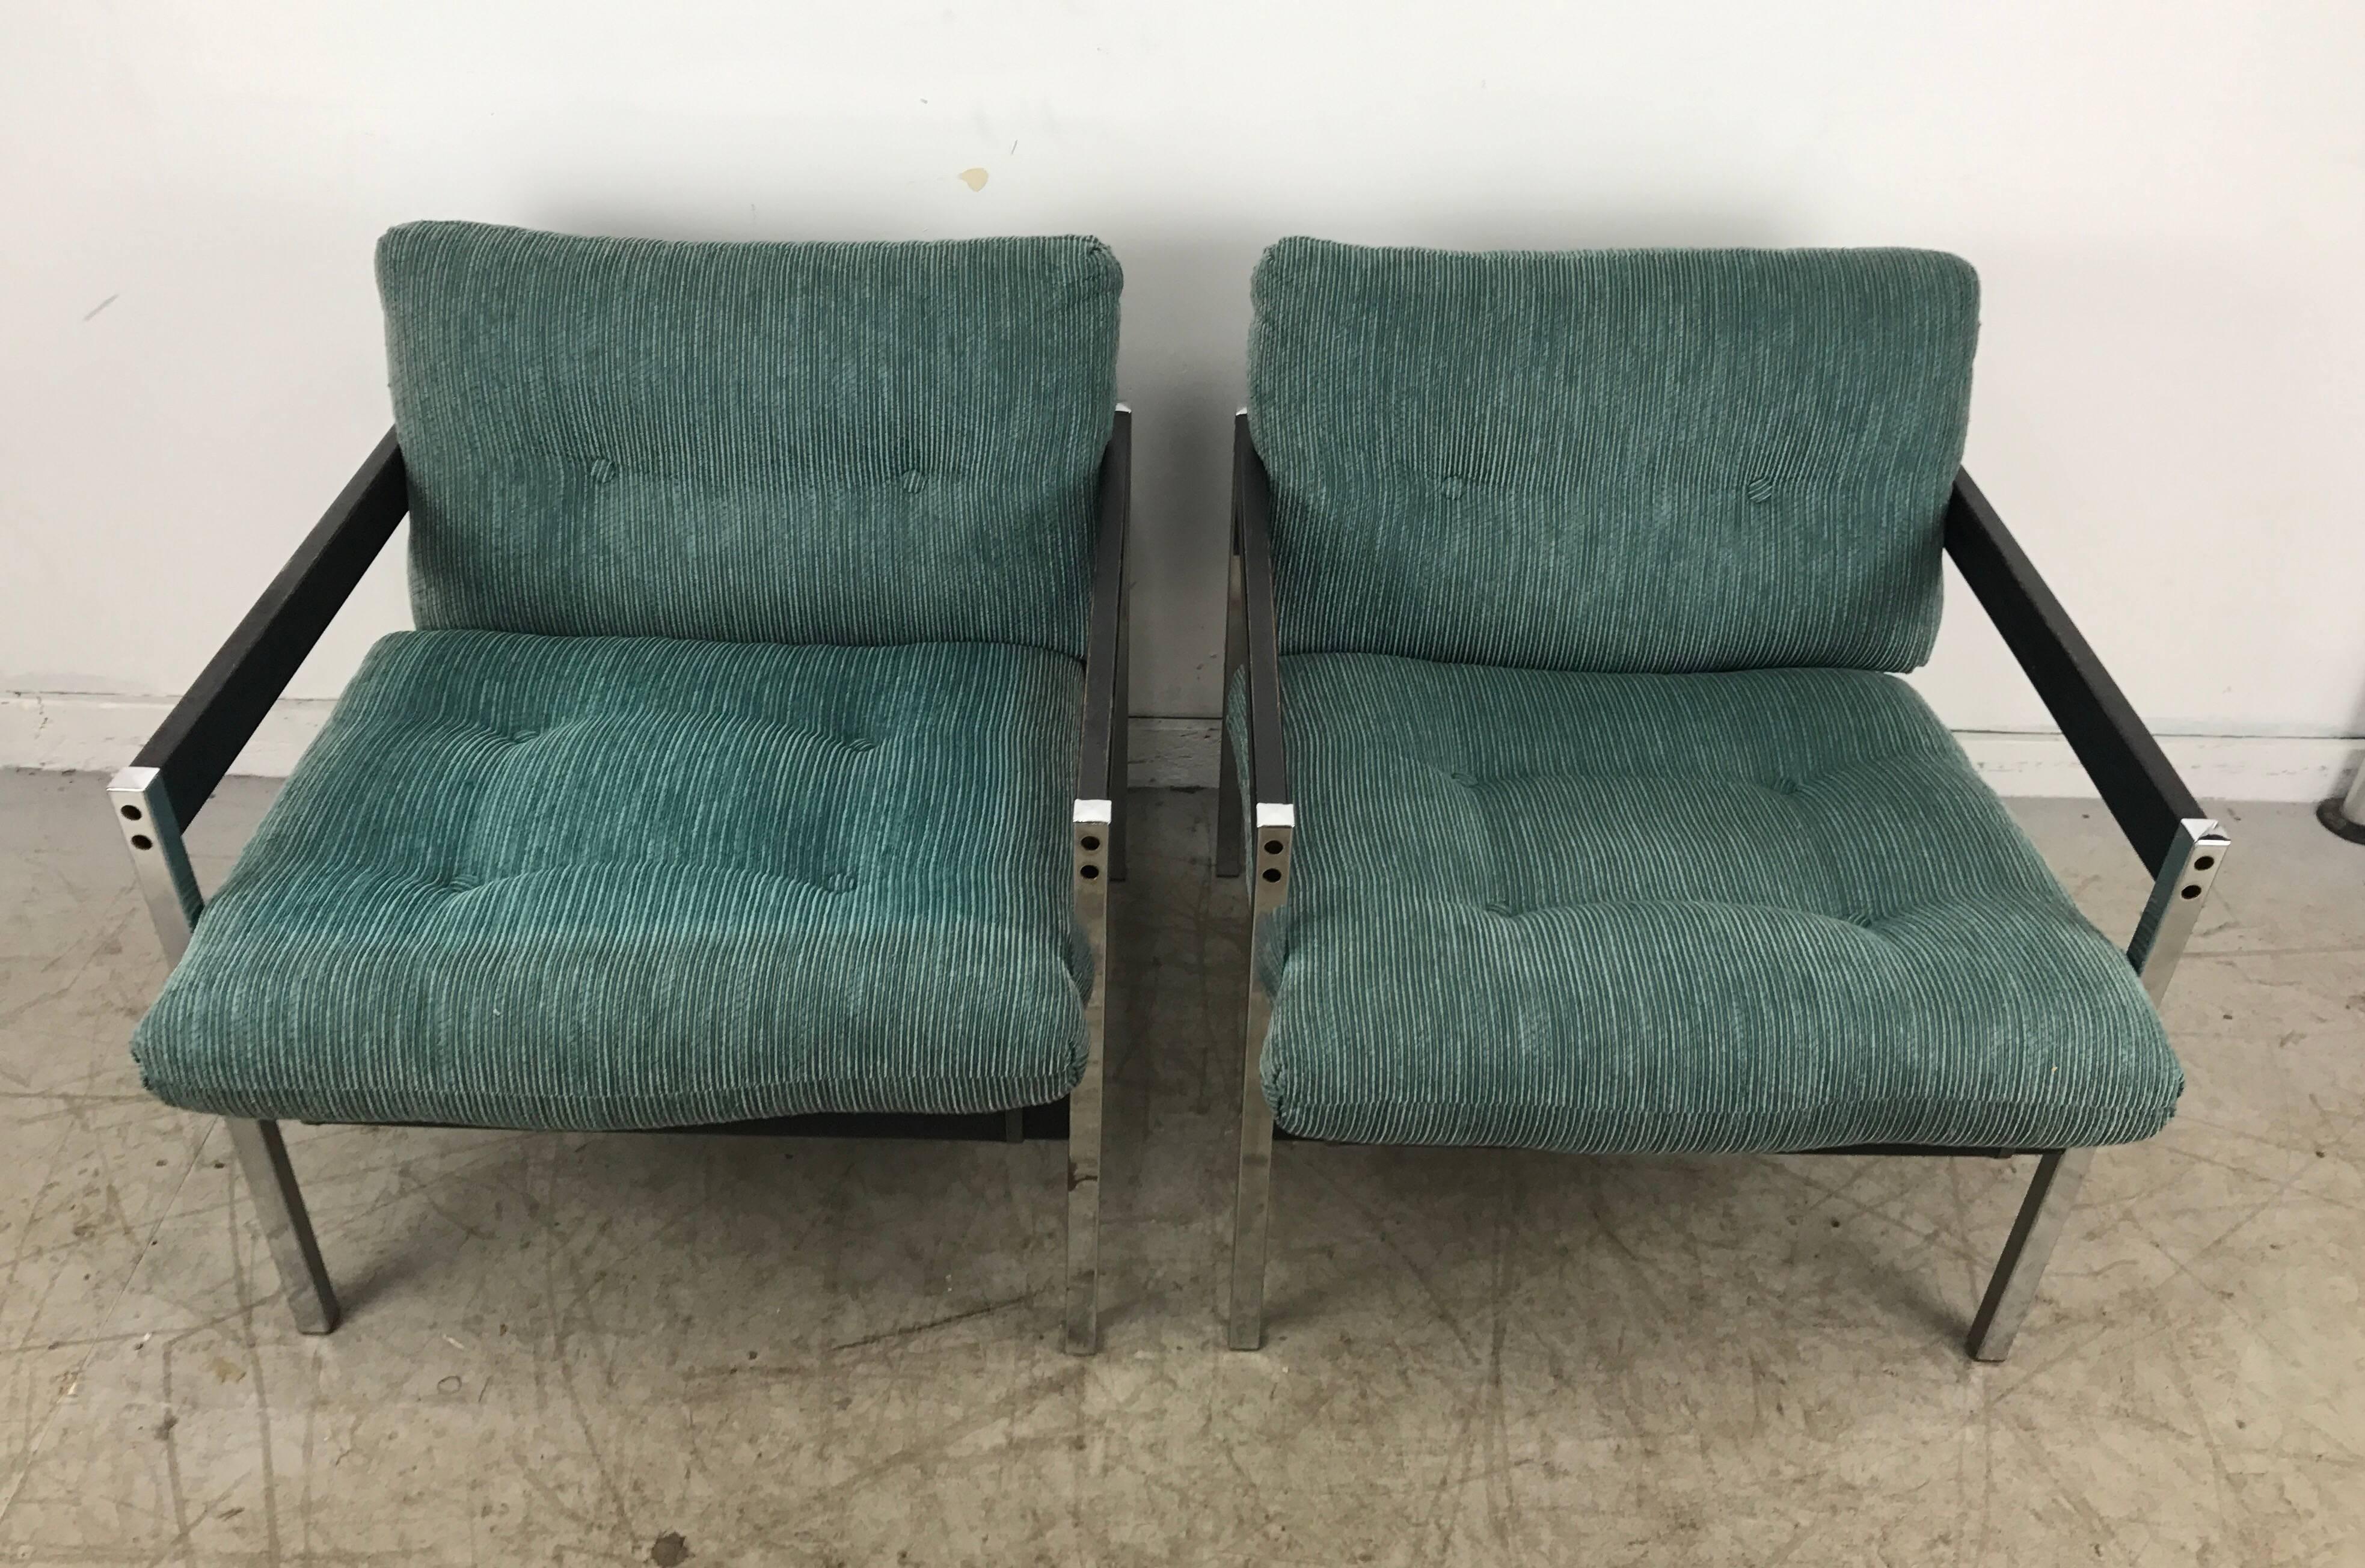 Pair of modernist chrome and wood sling lounge chairs after Charles Pollock. Handsome, elegant. Classic 1970s sling lounge. Extremely comfortable, retains original fabric.